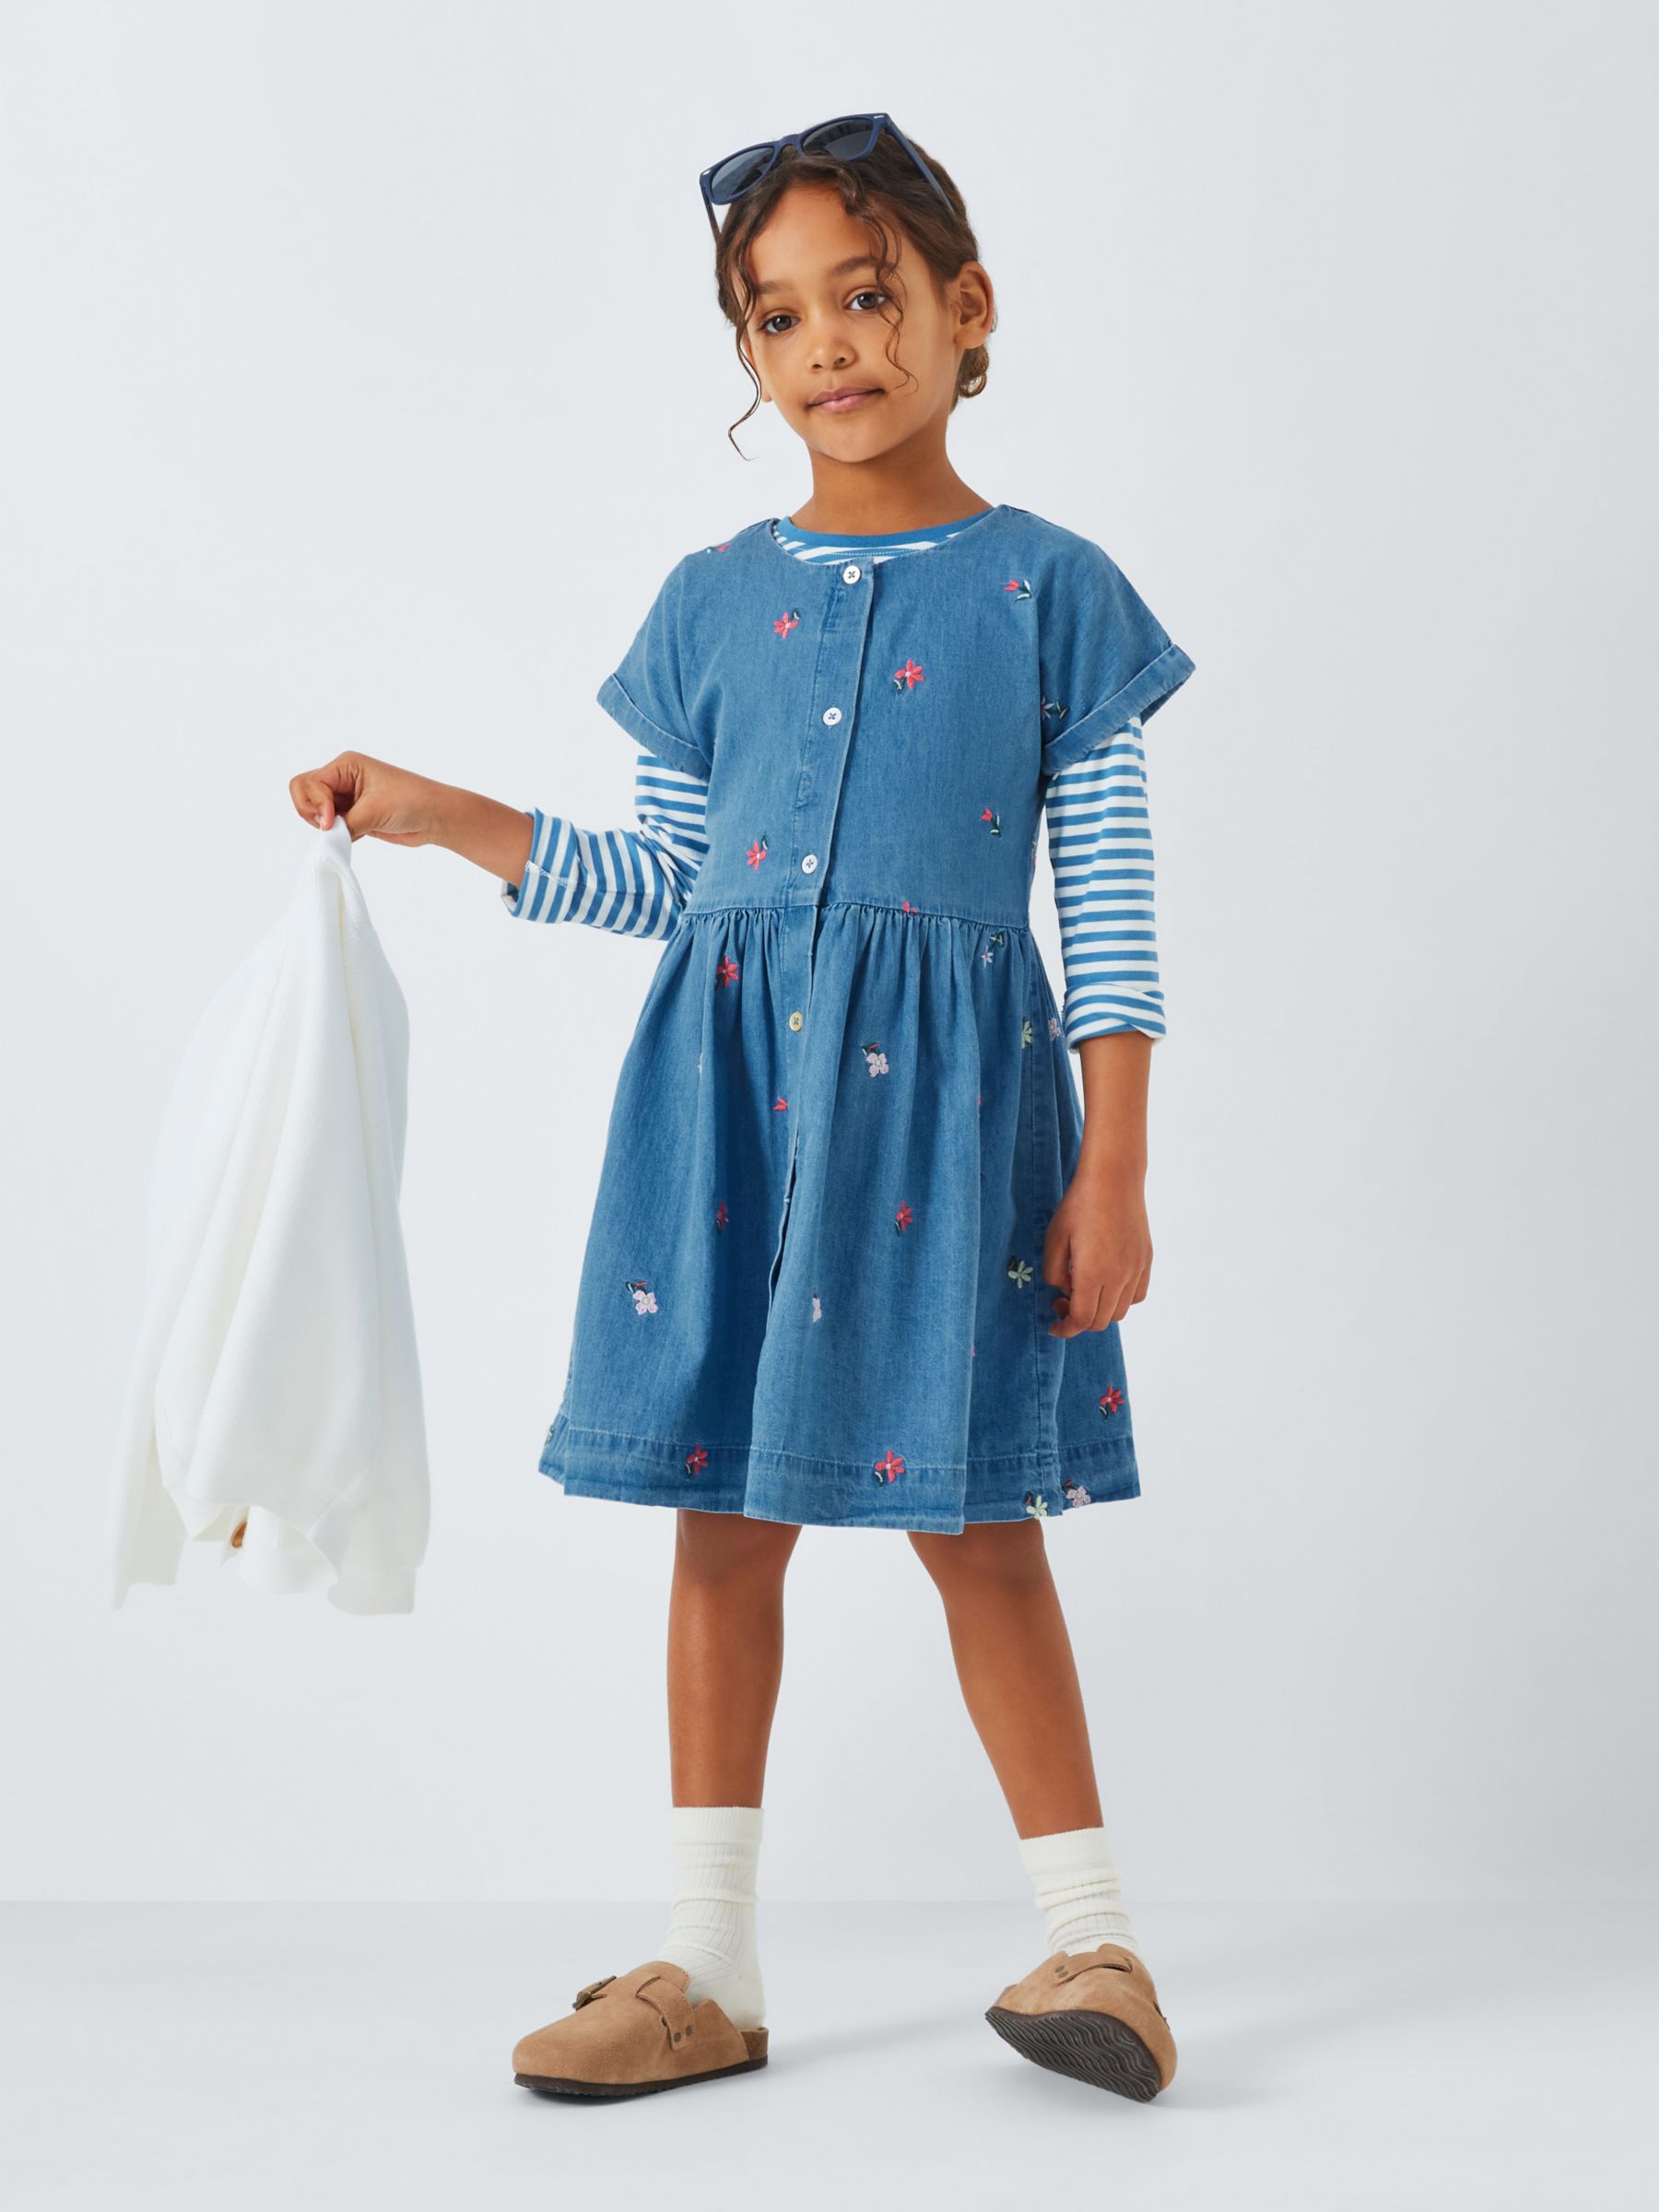 John Lewis Kids' Chambray Embroidered Flowers Dress, Blue, 7 years